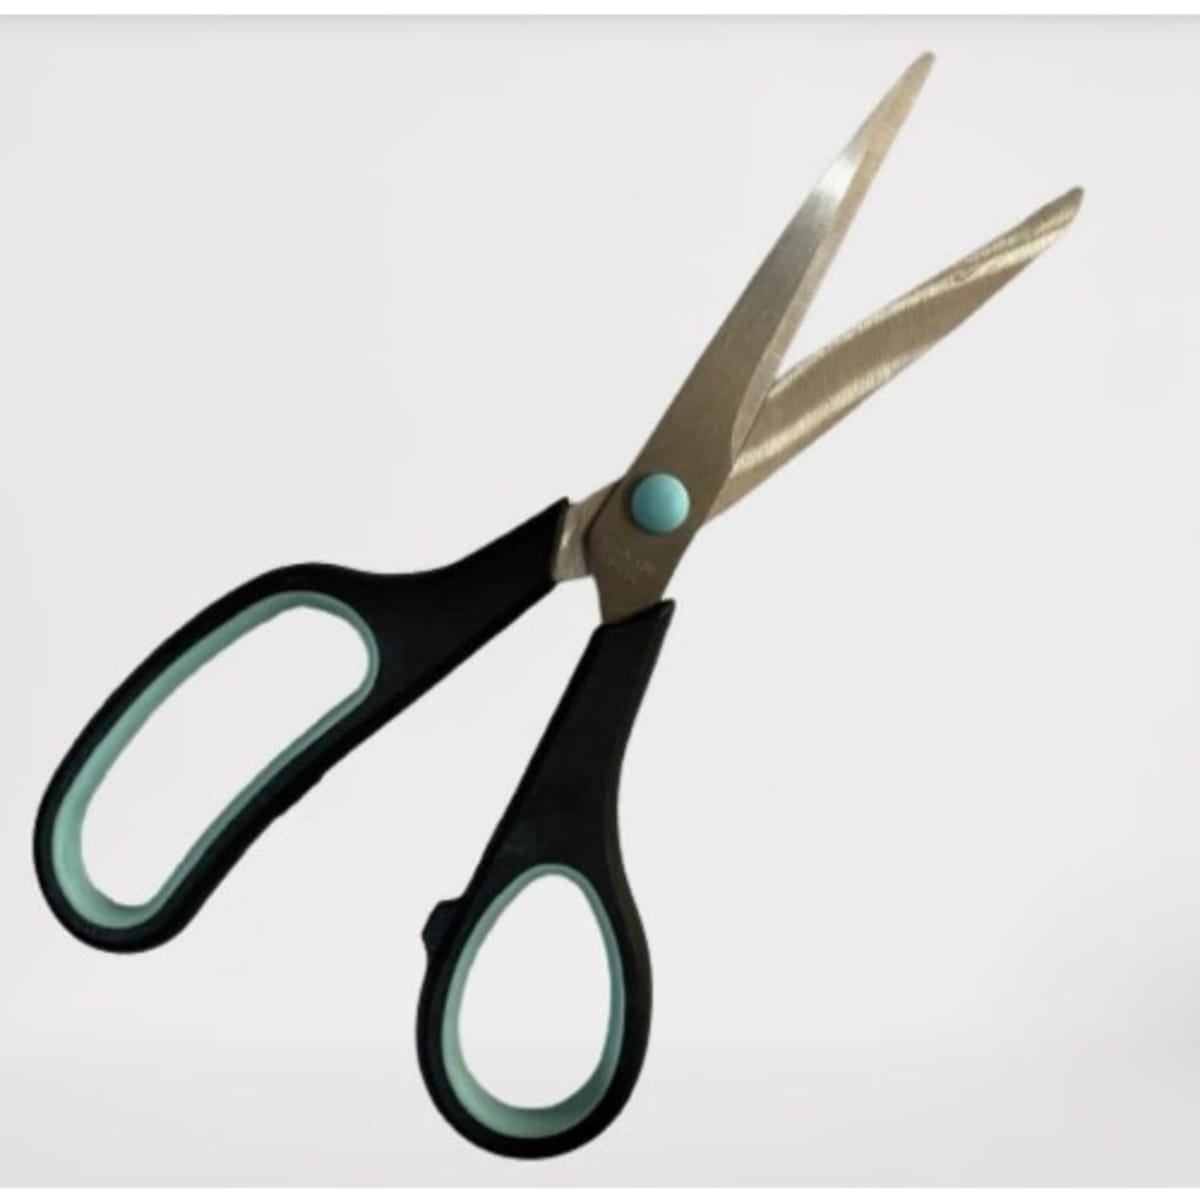 Stainless Steel Scissor Set Sewing/Kitchen/Household/Office